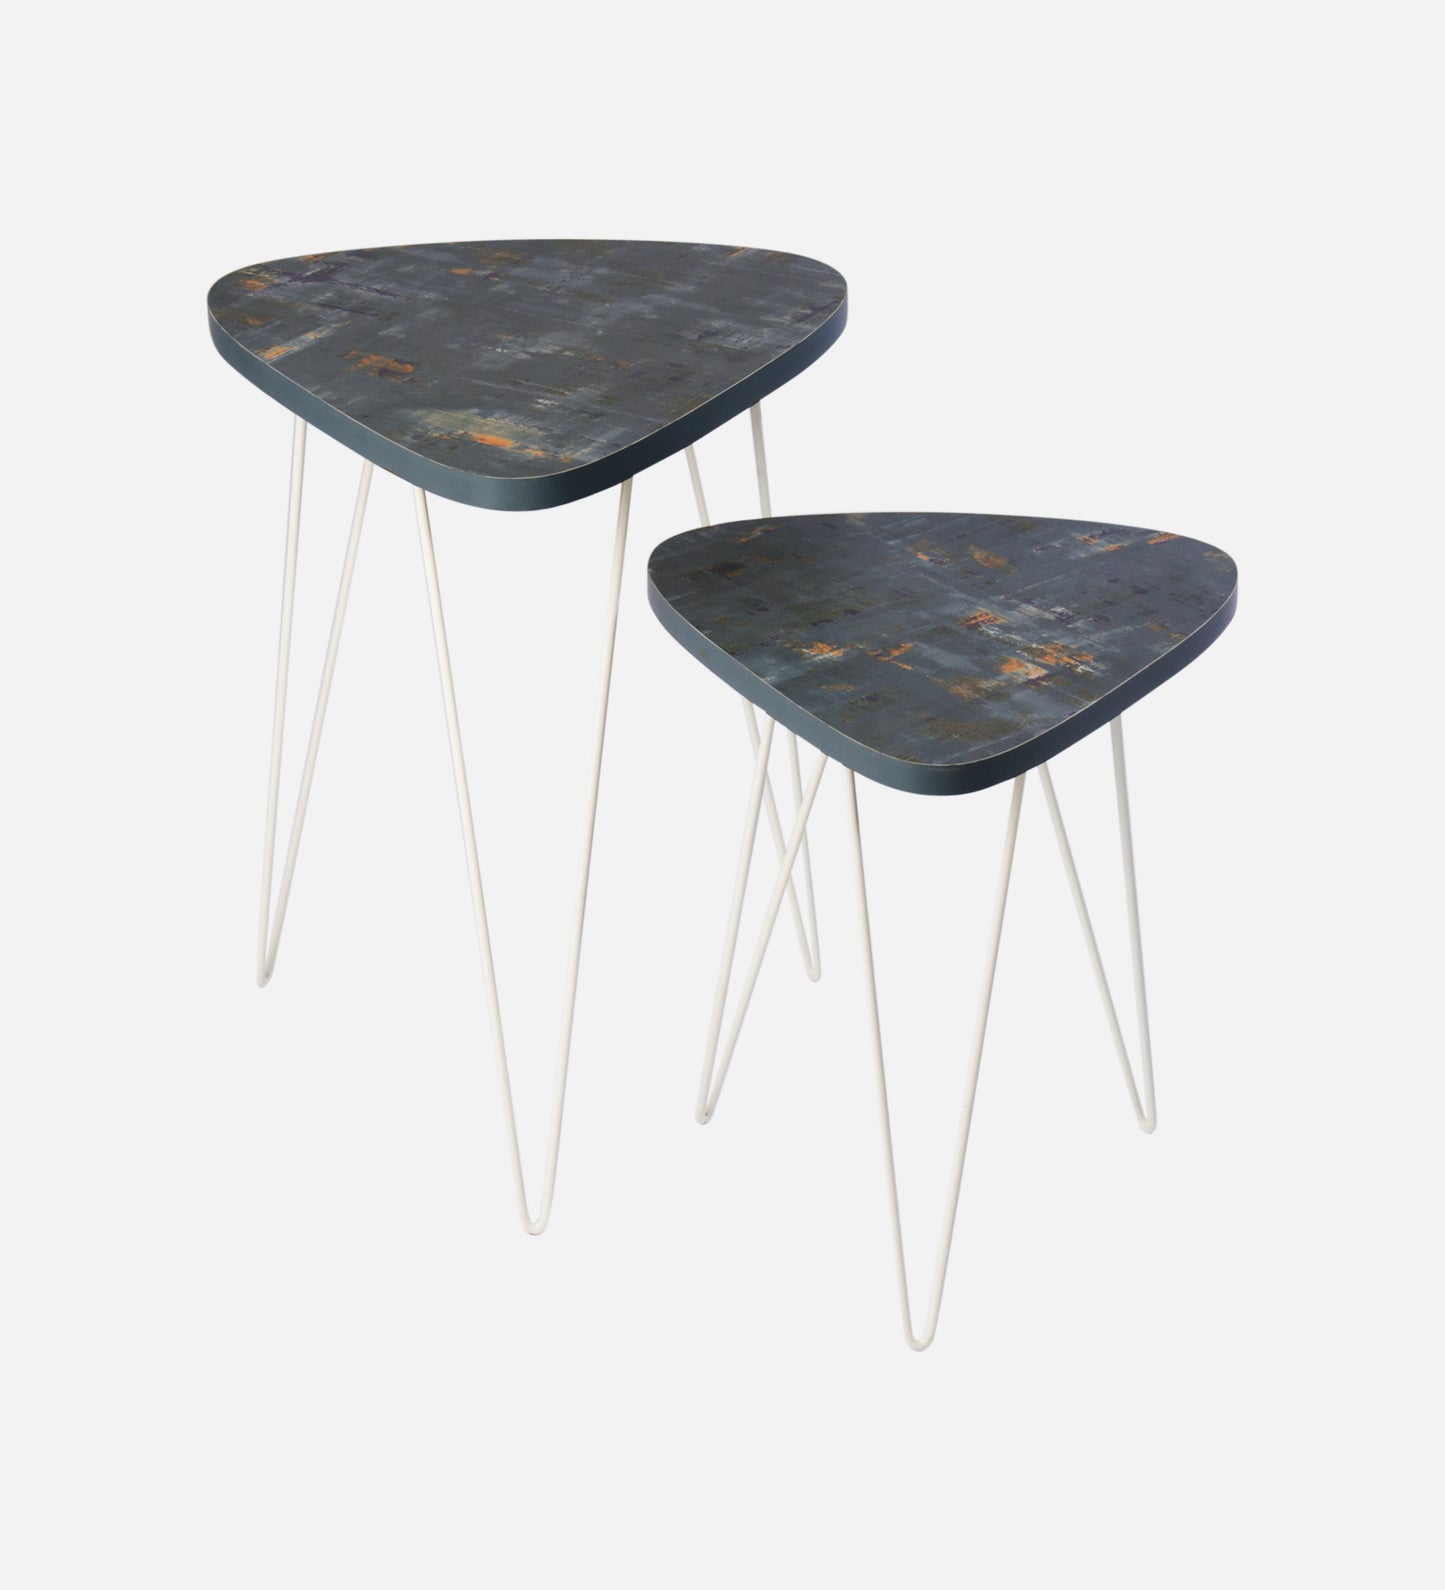 Bohemian Tint Trinity Nesting Tables with Hairpin Legs, Side Tables, Wooden Tables, Living Room Decor by A Tiny Mistake